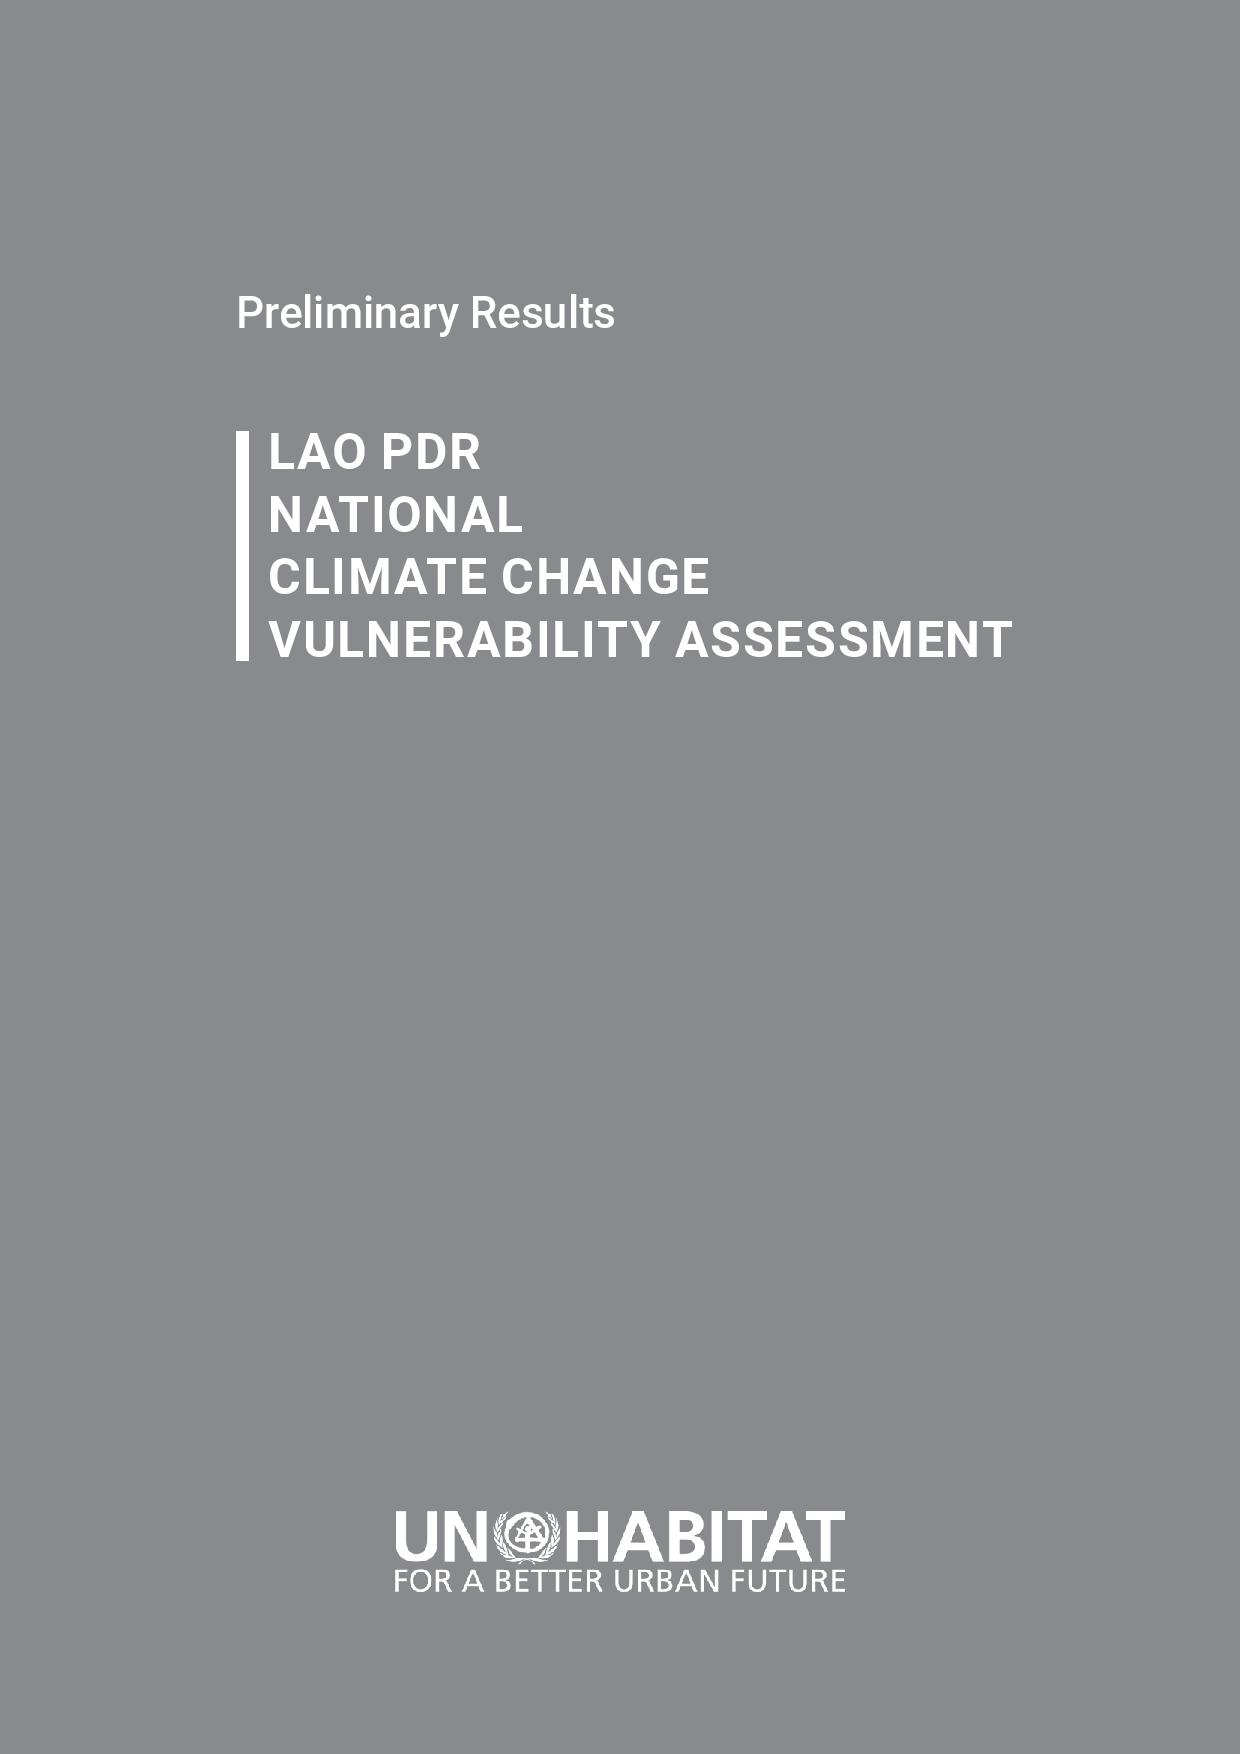 Lao PDR National Climate Change Vulnerability Assessment